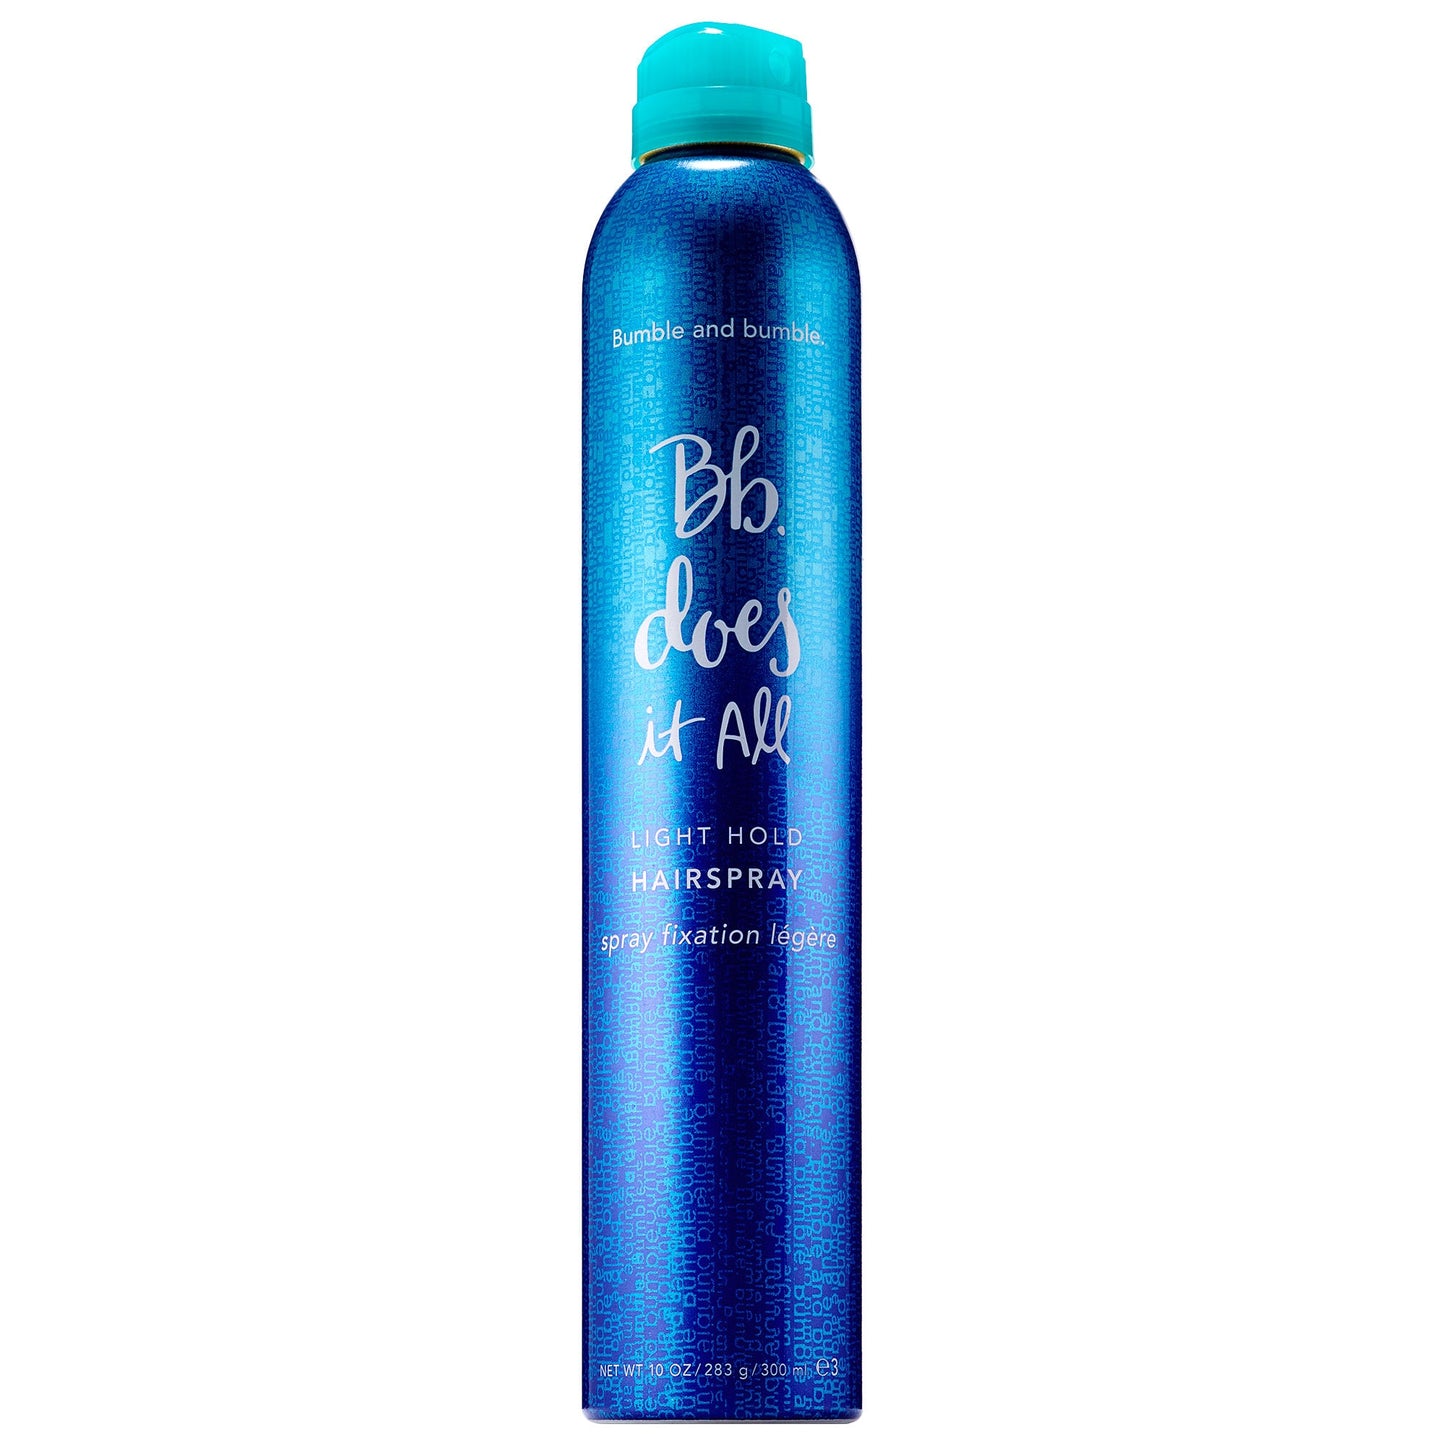 Bumble and bumble Does It All Light Hold Hairspray | New London Pharmacy